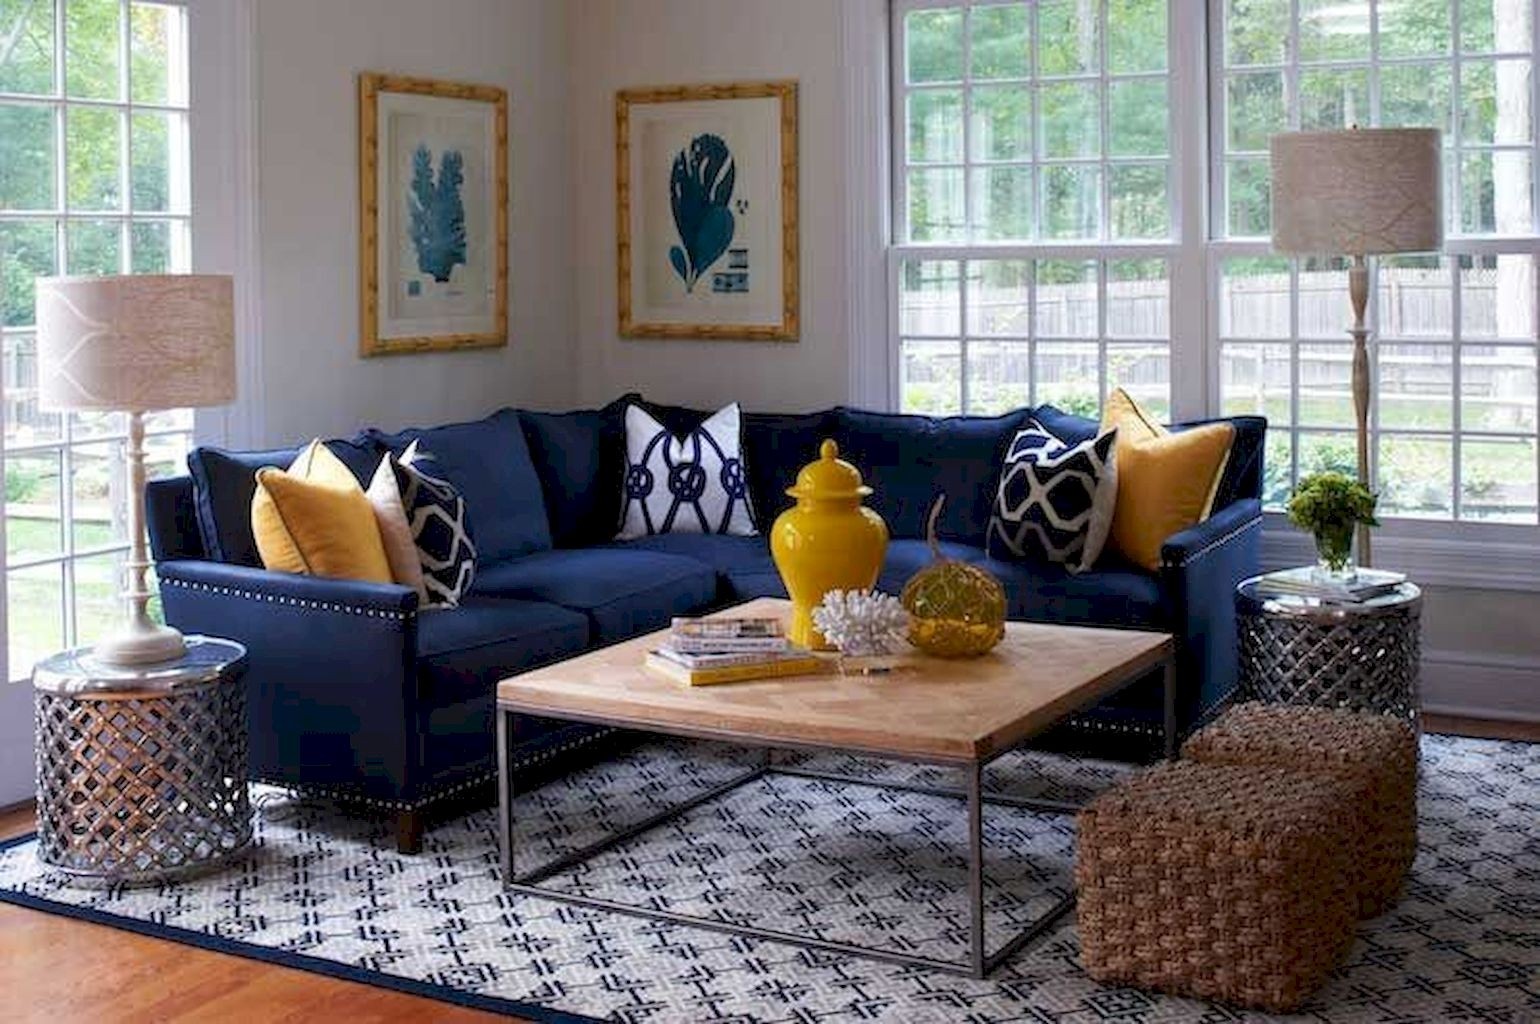 Navy blue couch with white piping